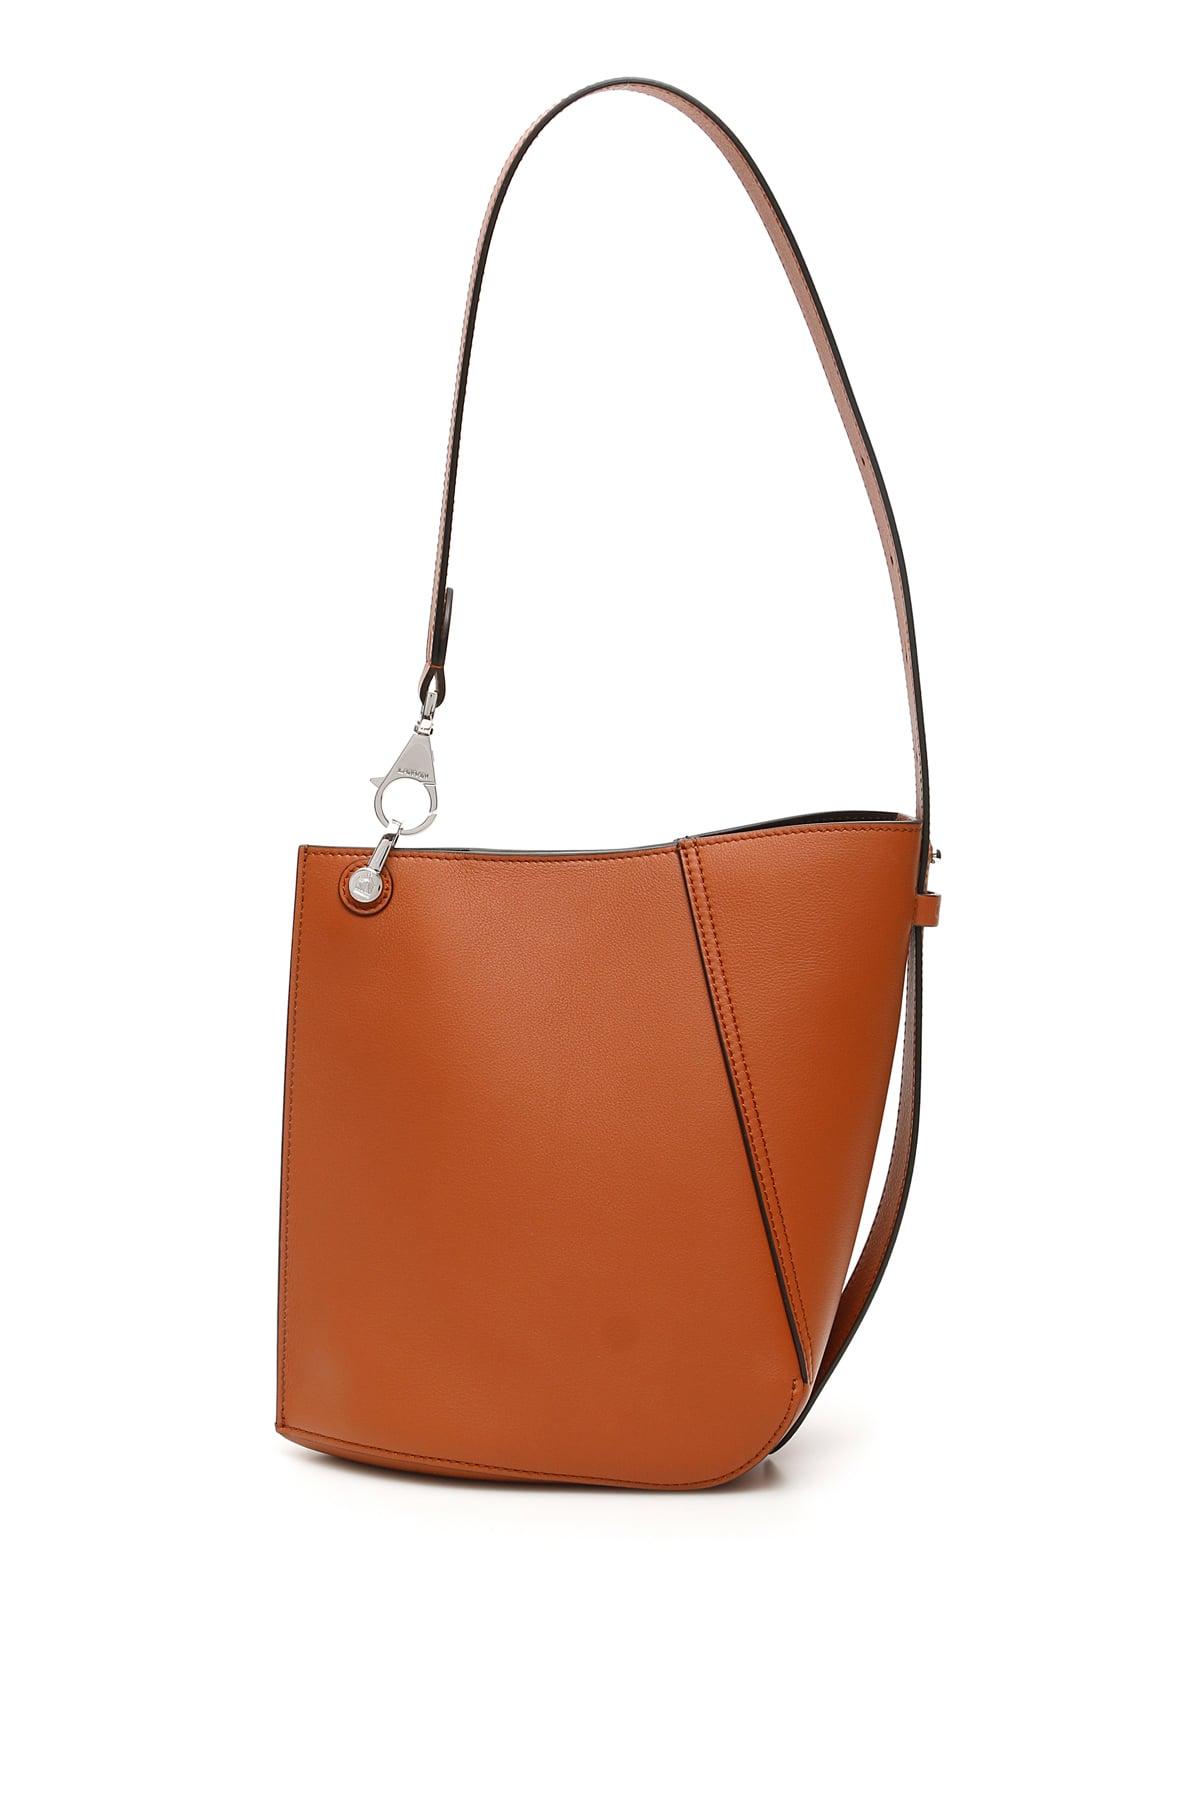 Lanvin Leather Small Hook Bag in Brown - Lyst